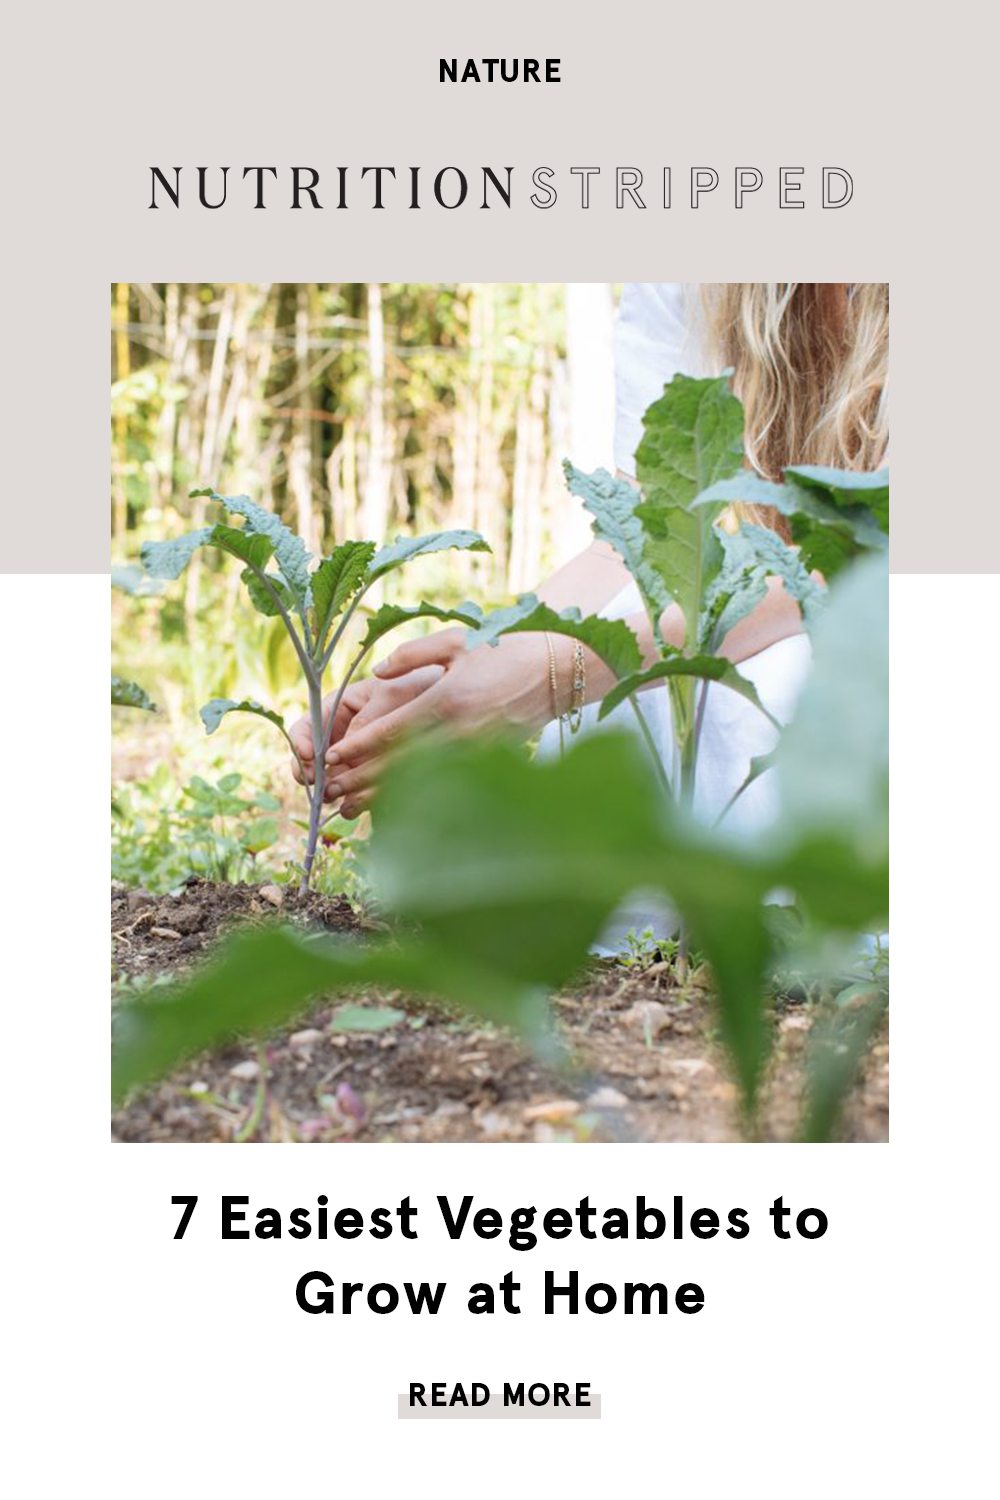 Easiest Vegetables to Grow | Nutrition Stripped